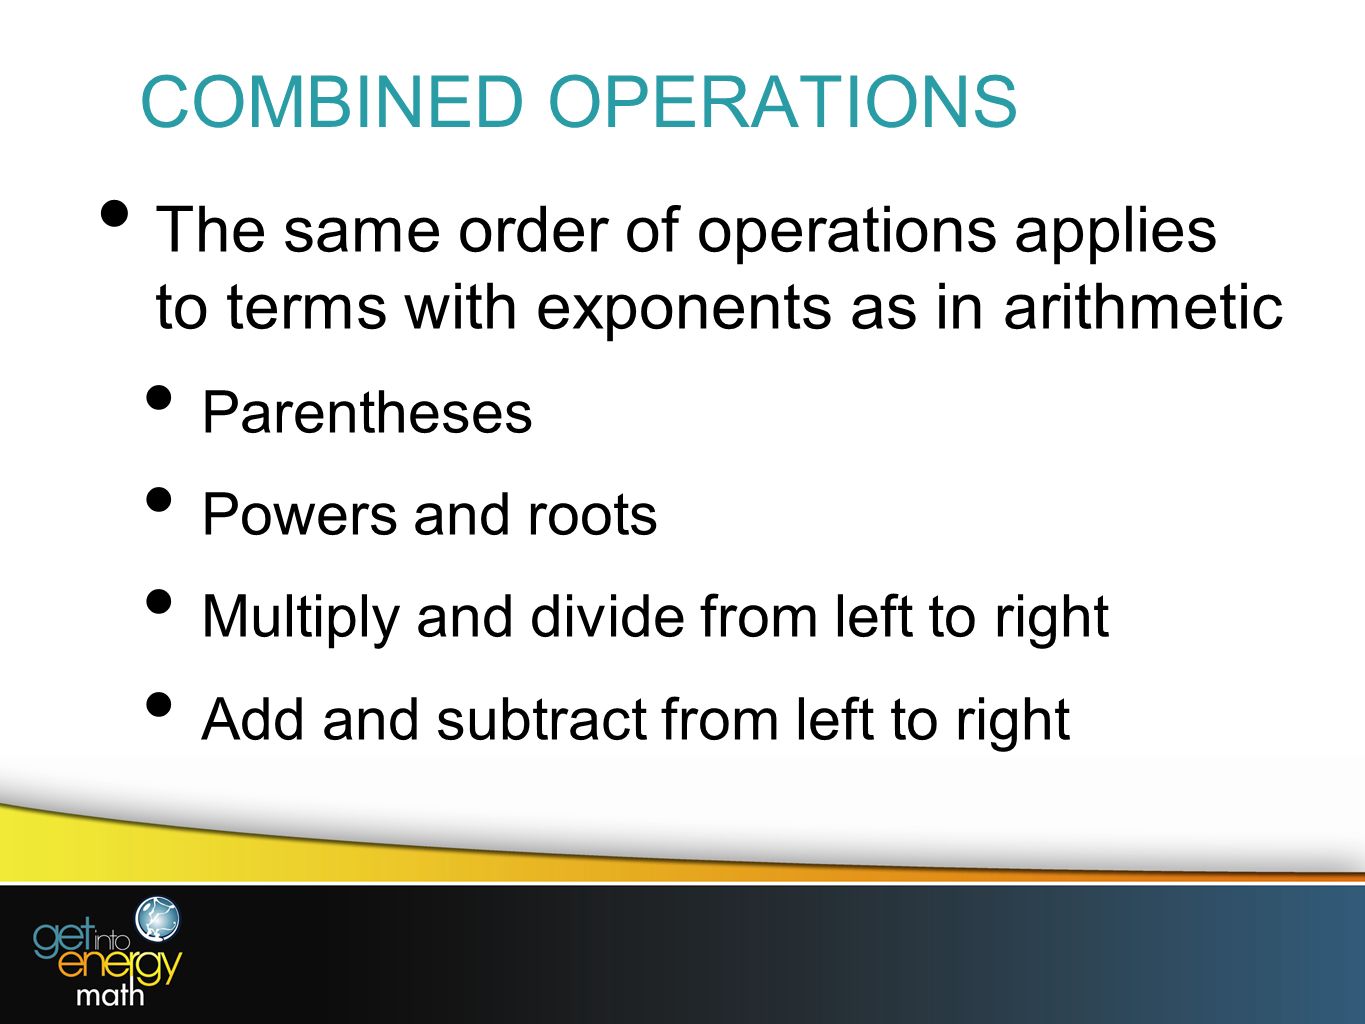 COMBINED OPERATIONS The same order of operations applies to terms with exponents as in arithmetic.